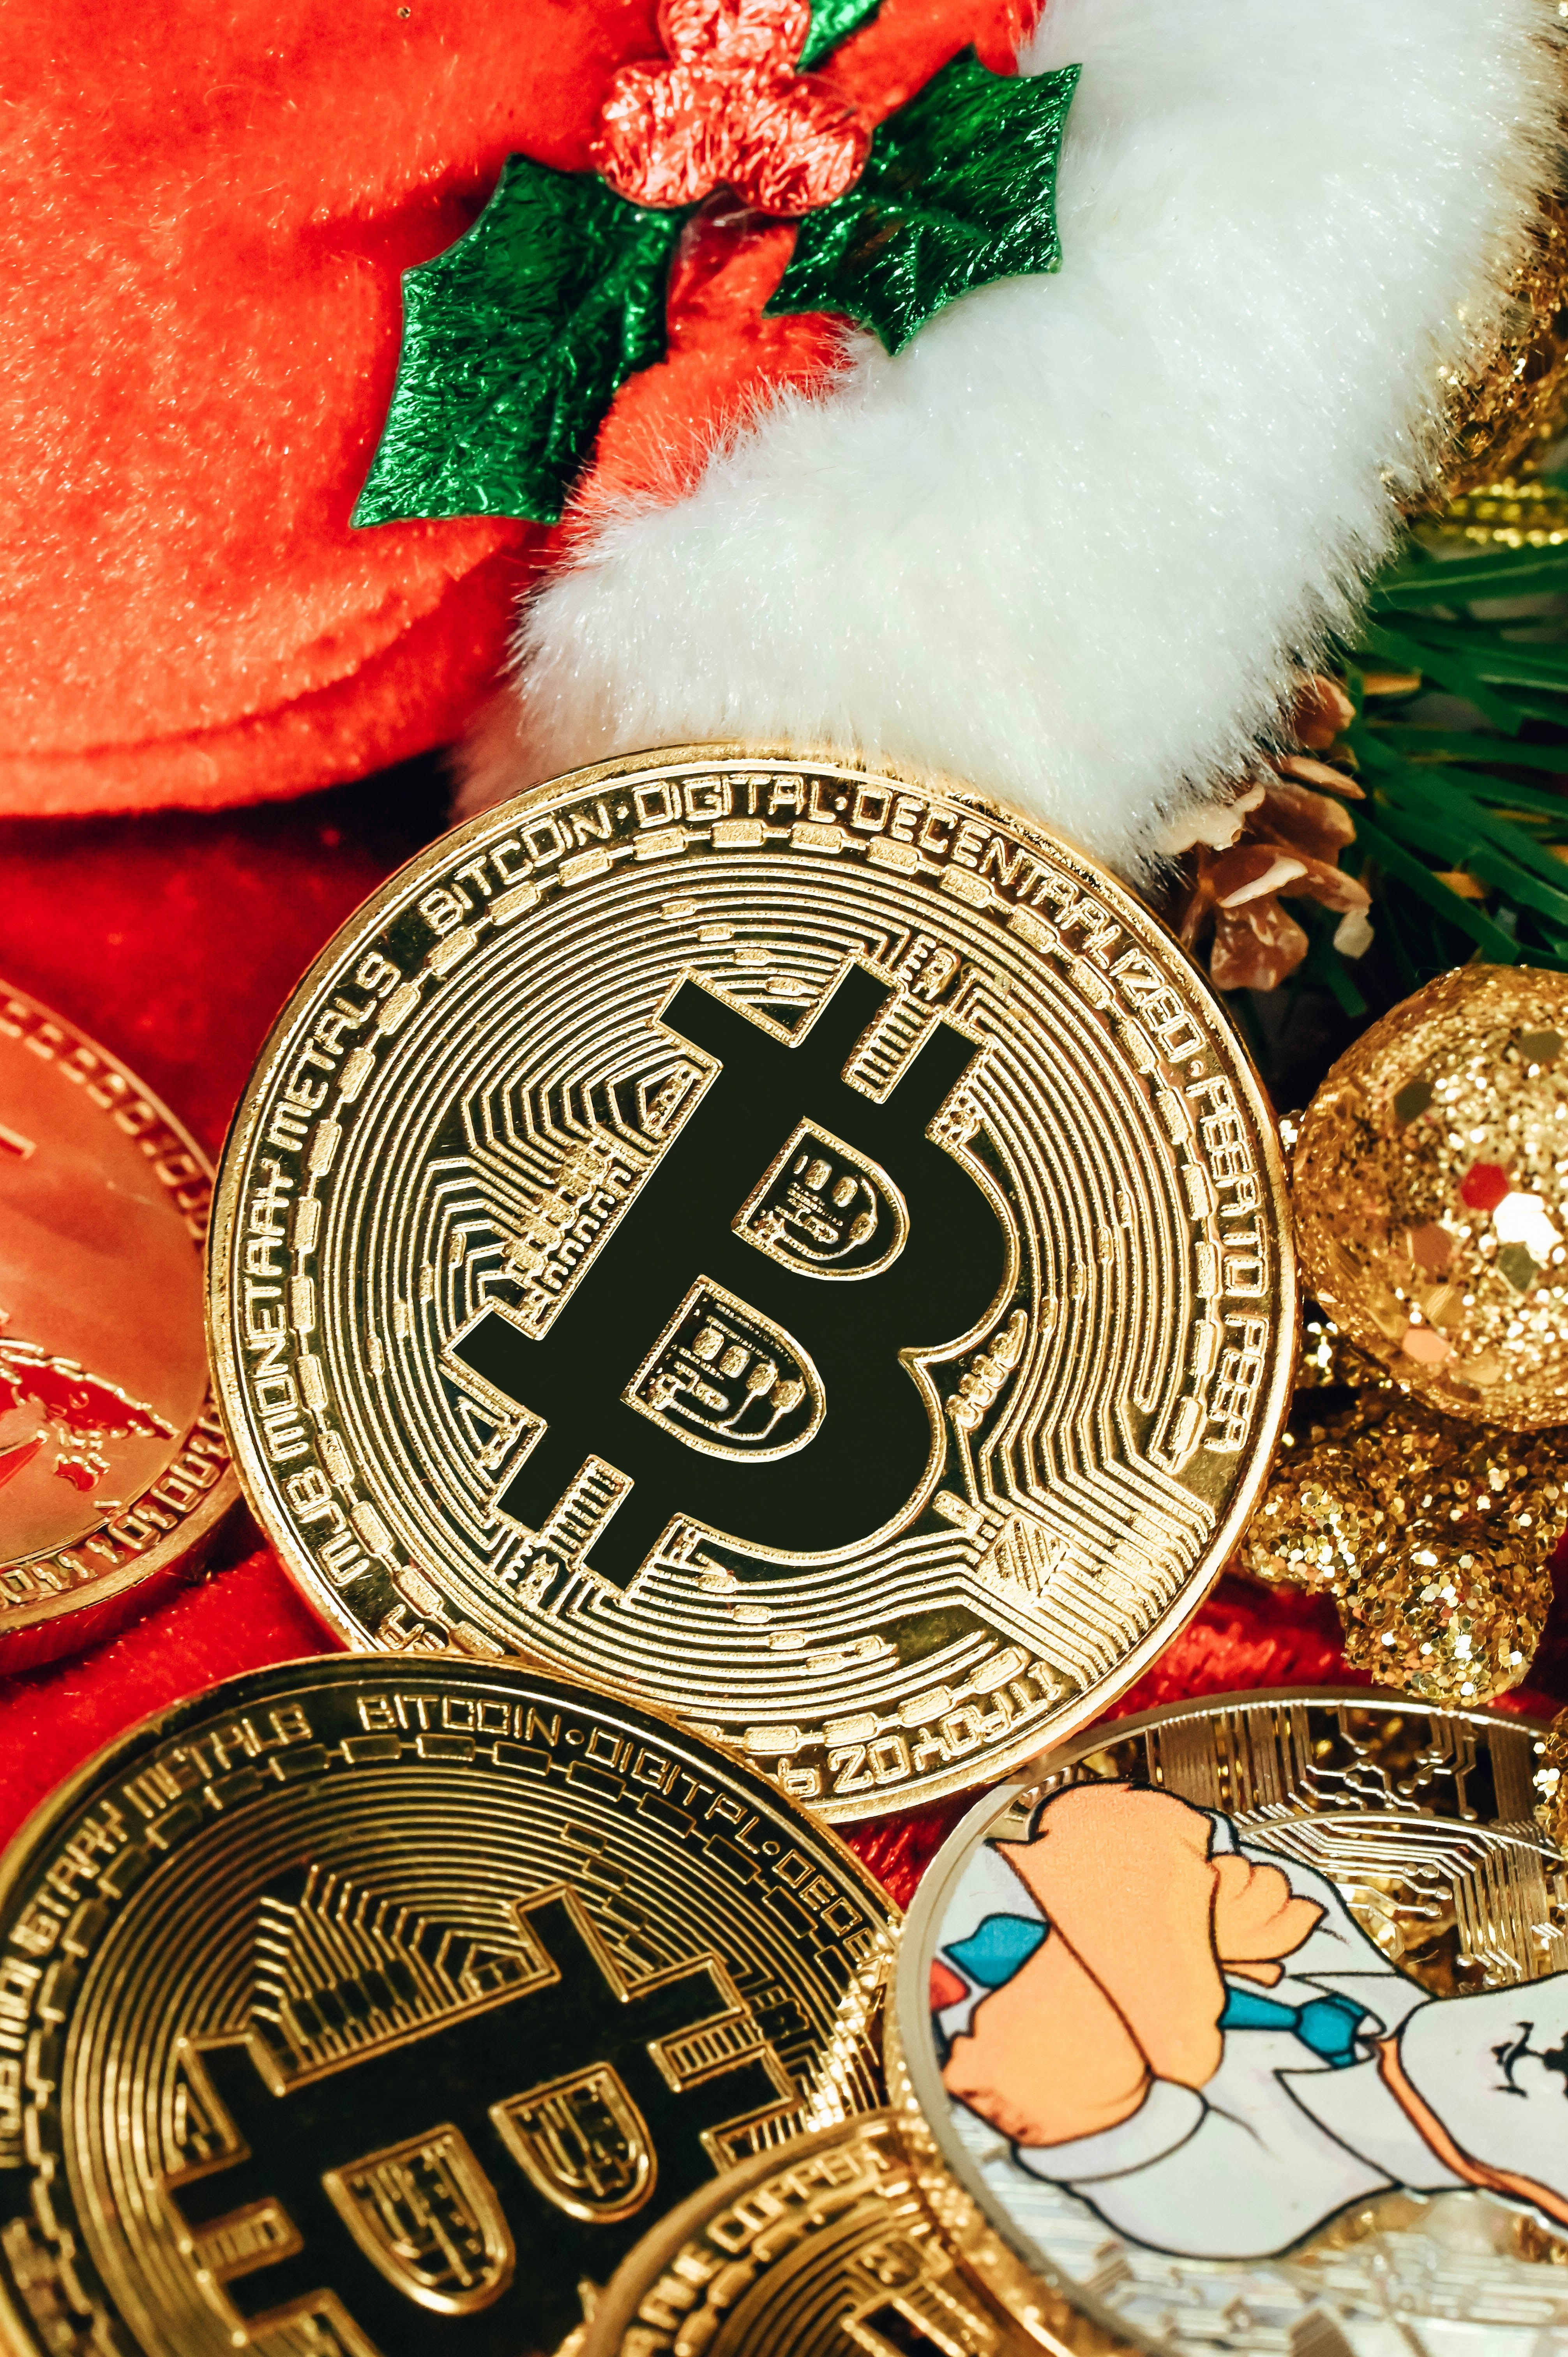 Two Bitcoins surrounded by Christmas ornaments